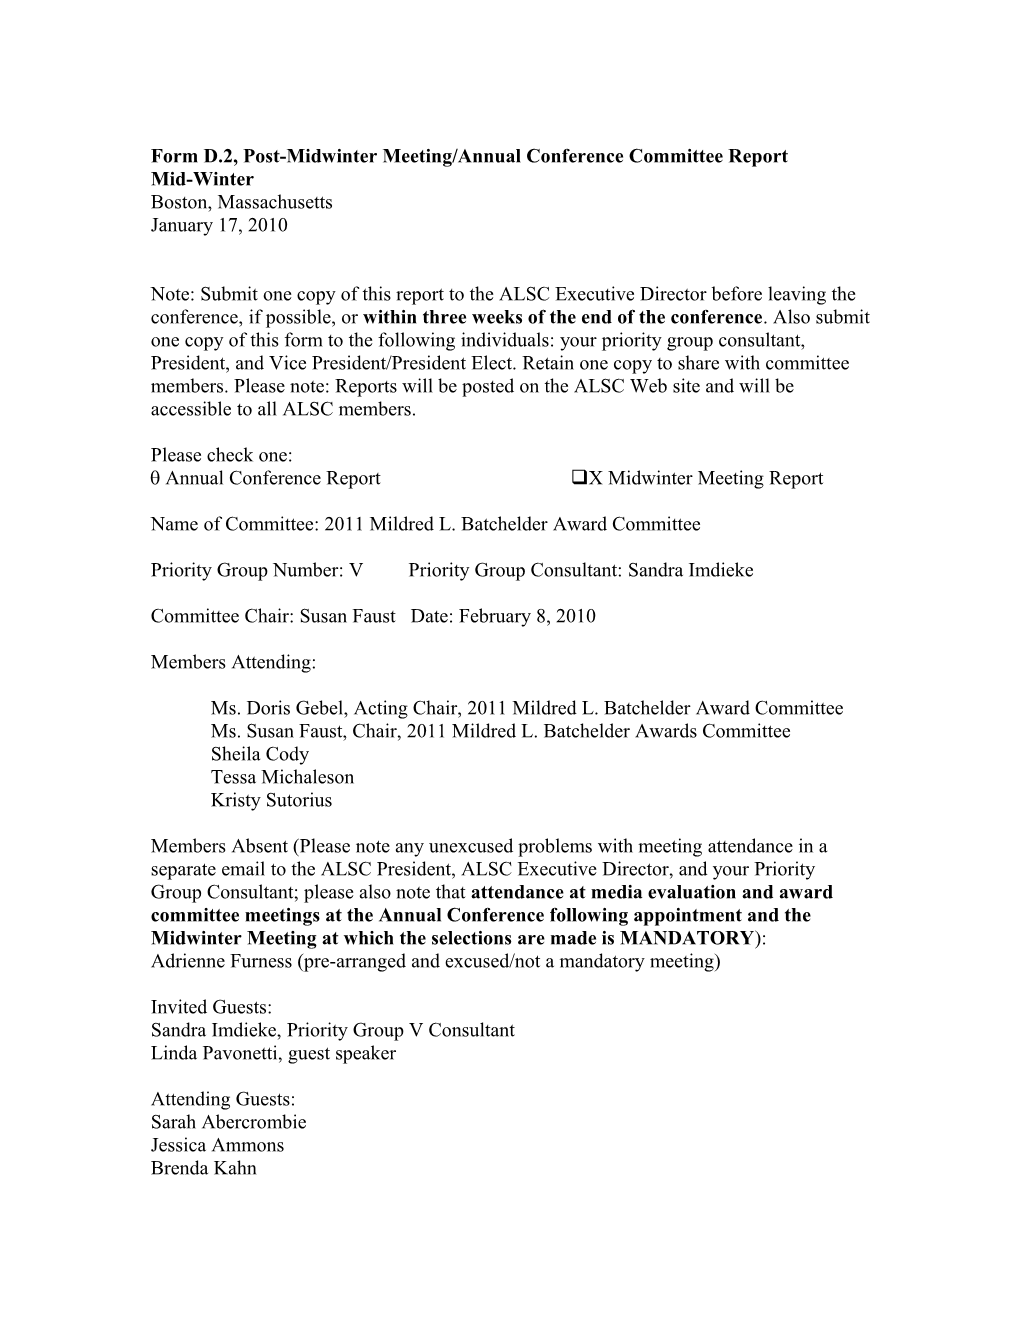 Form D.2, Post-Midwinter Meeting/Annual Conference Committee Report